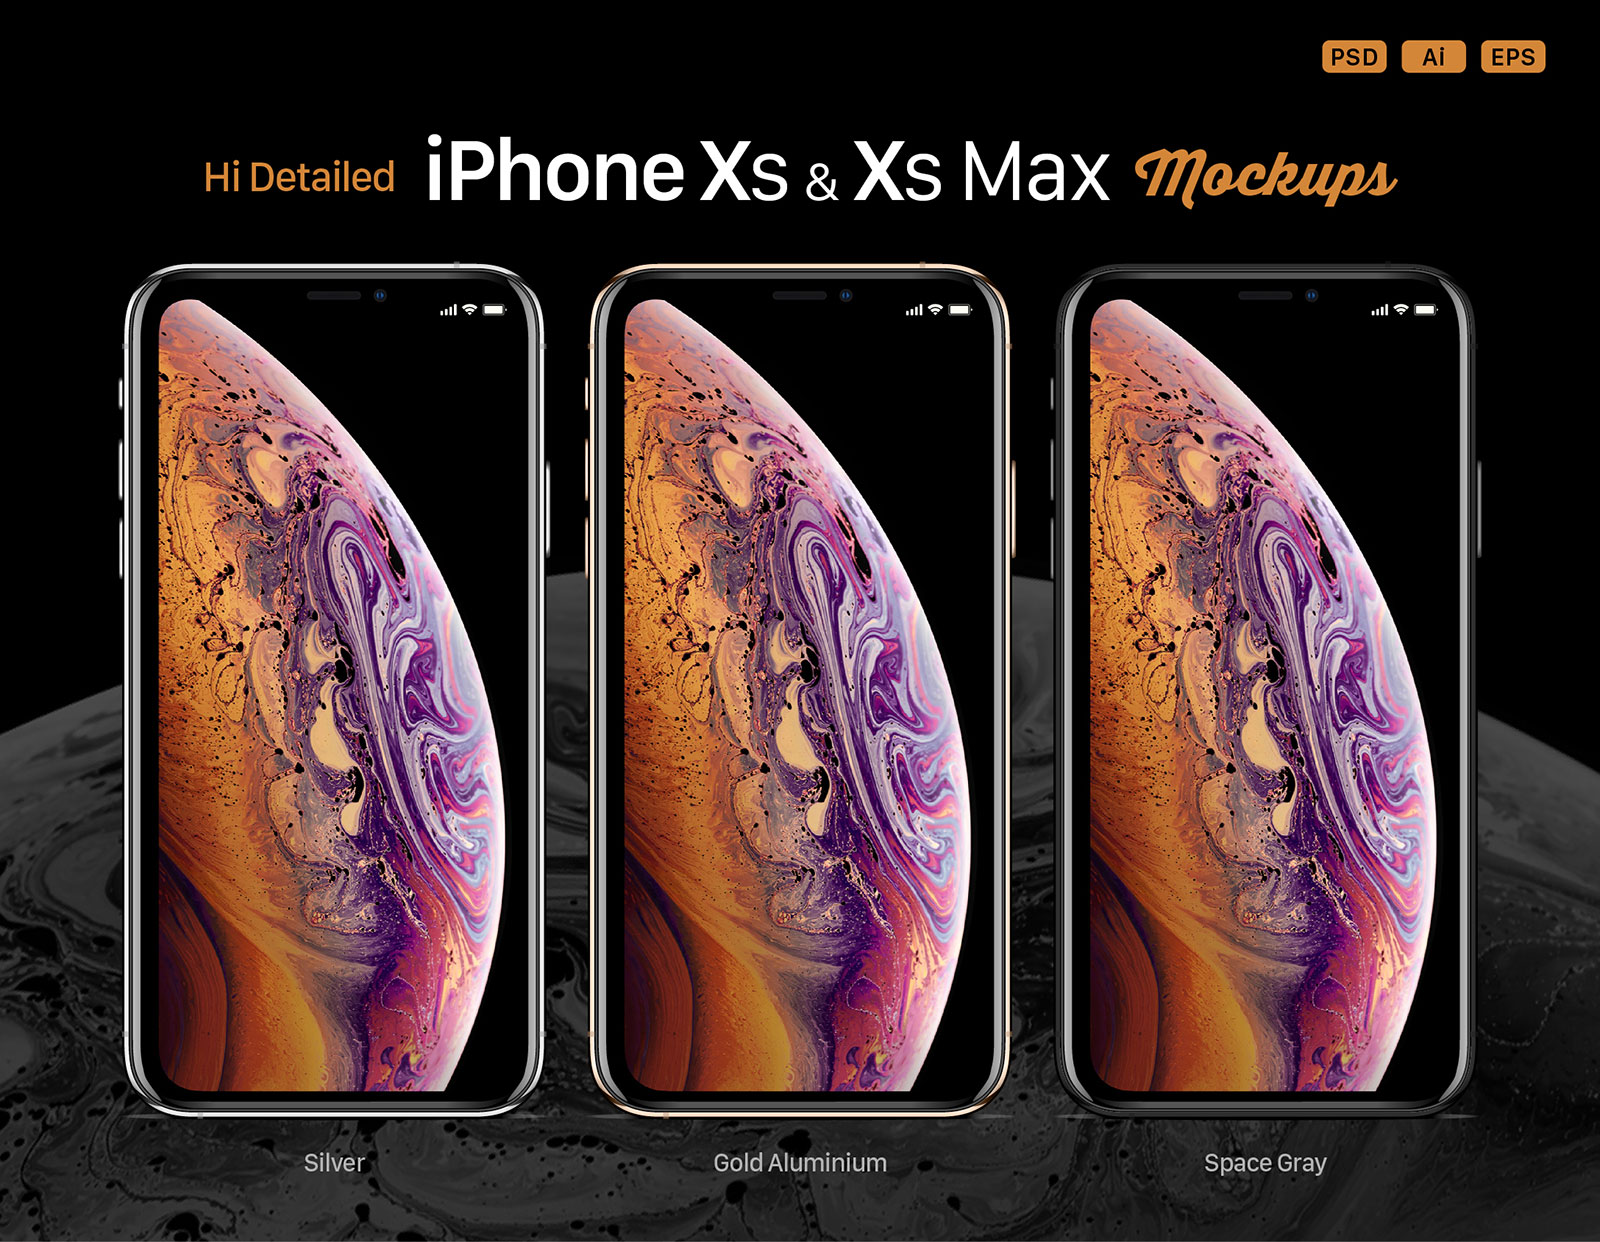 Free iPhone Xs & Xs Max Mockup in PSD, Ai & EPS Format